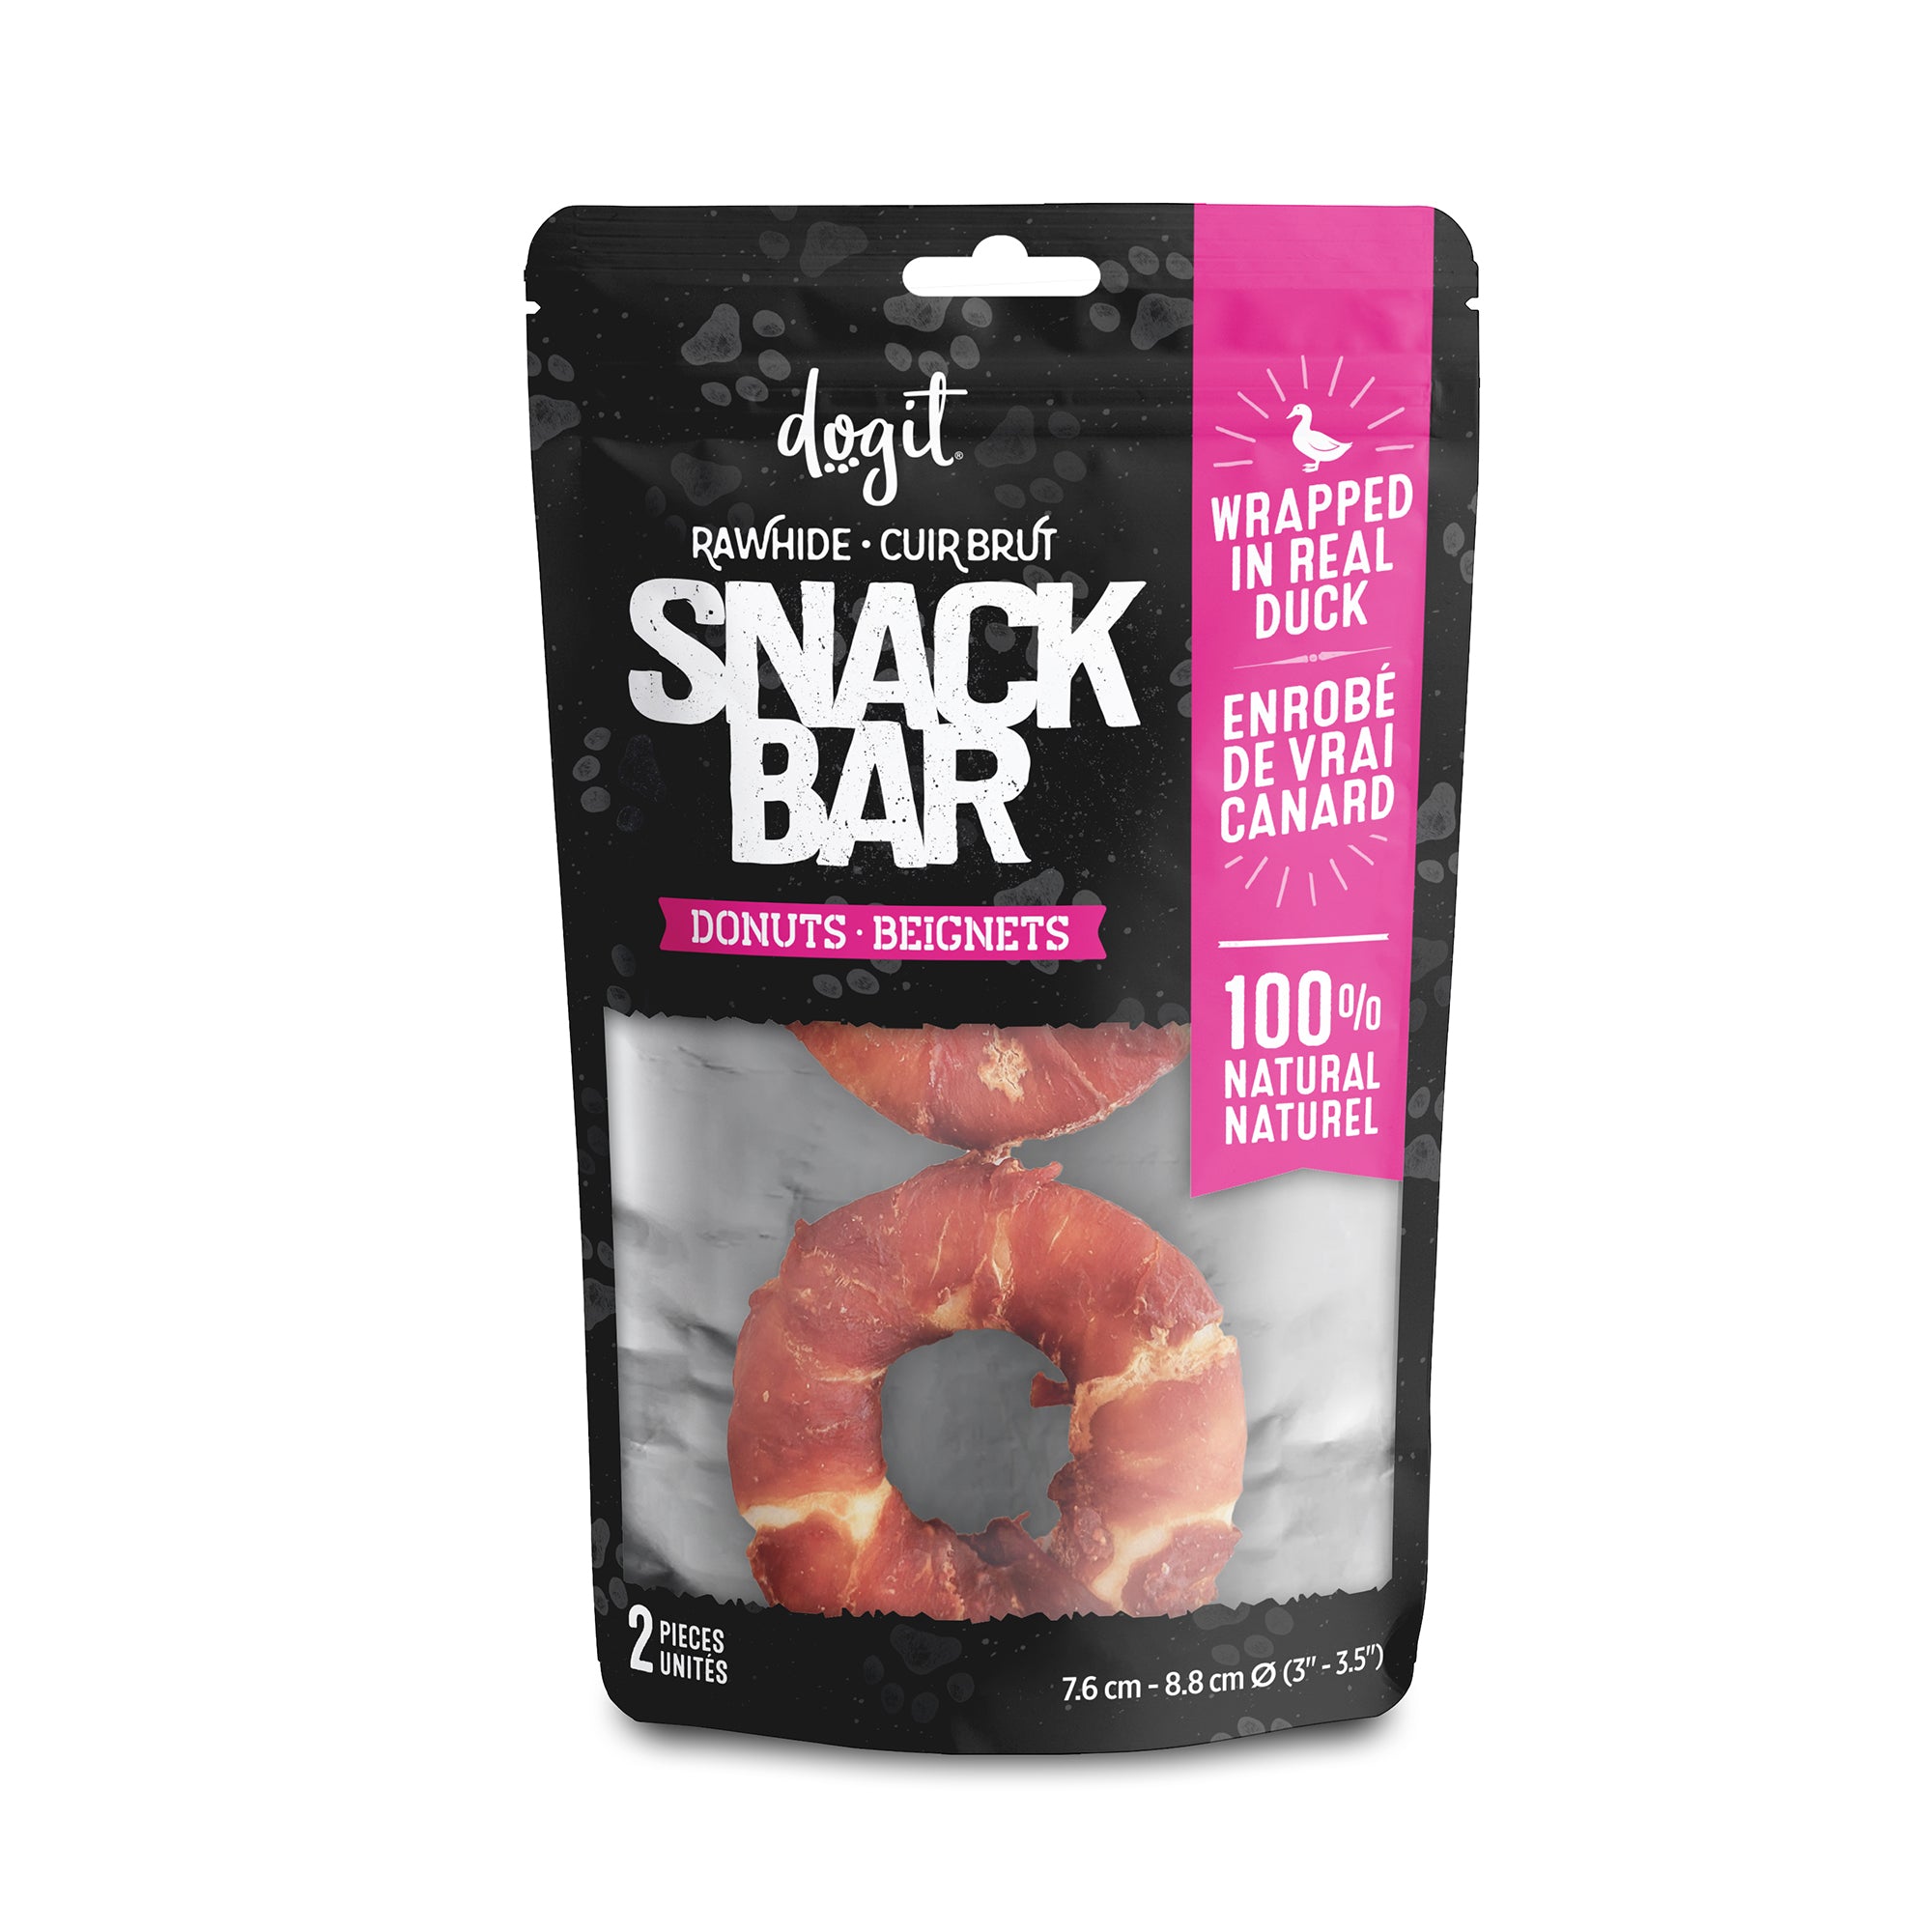 Dogit Snack Bar Rawhide - Duck-Wrapped Donuts - 2 pcs (7.6 - 8.8 cm/3 - 3.5 in dia.)